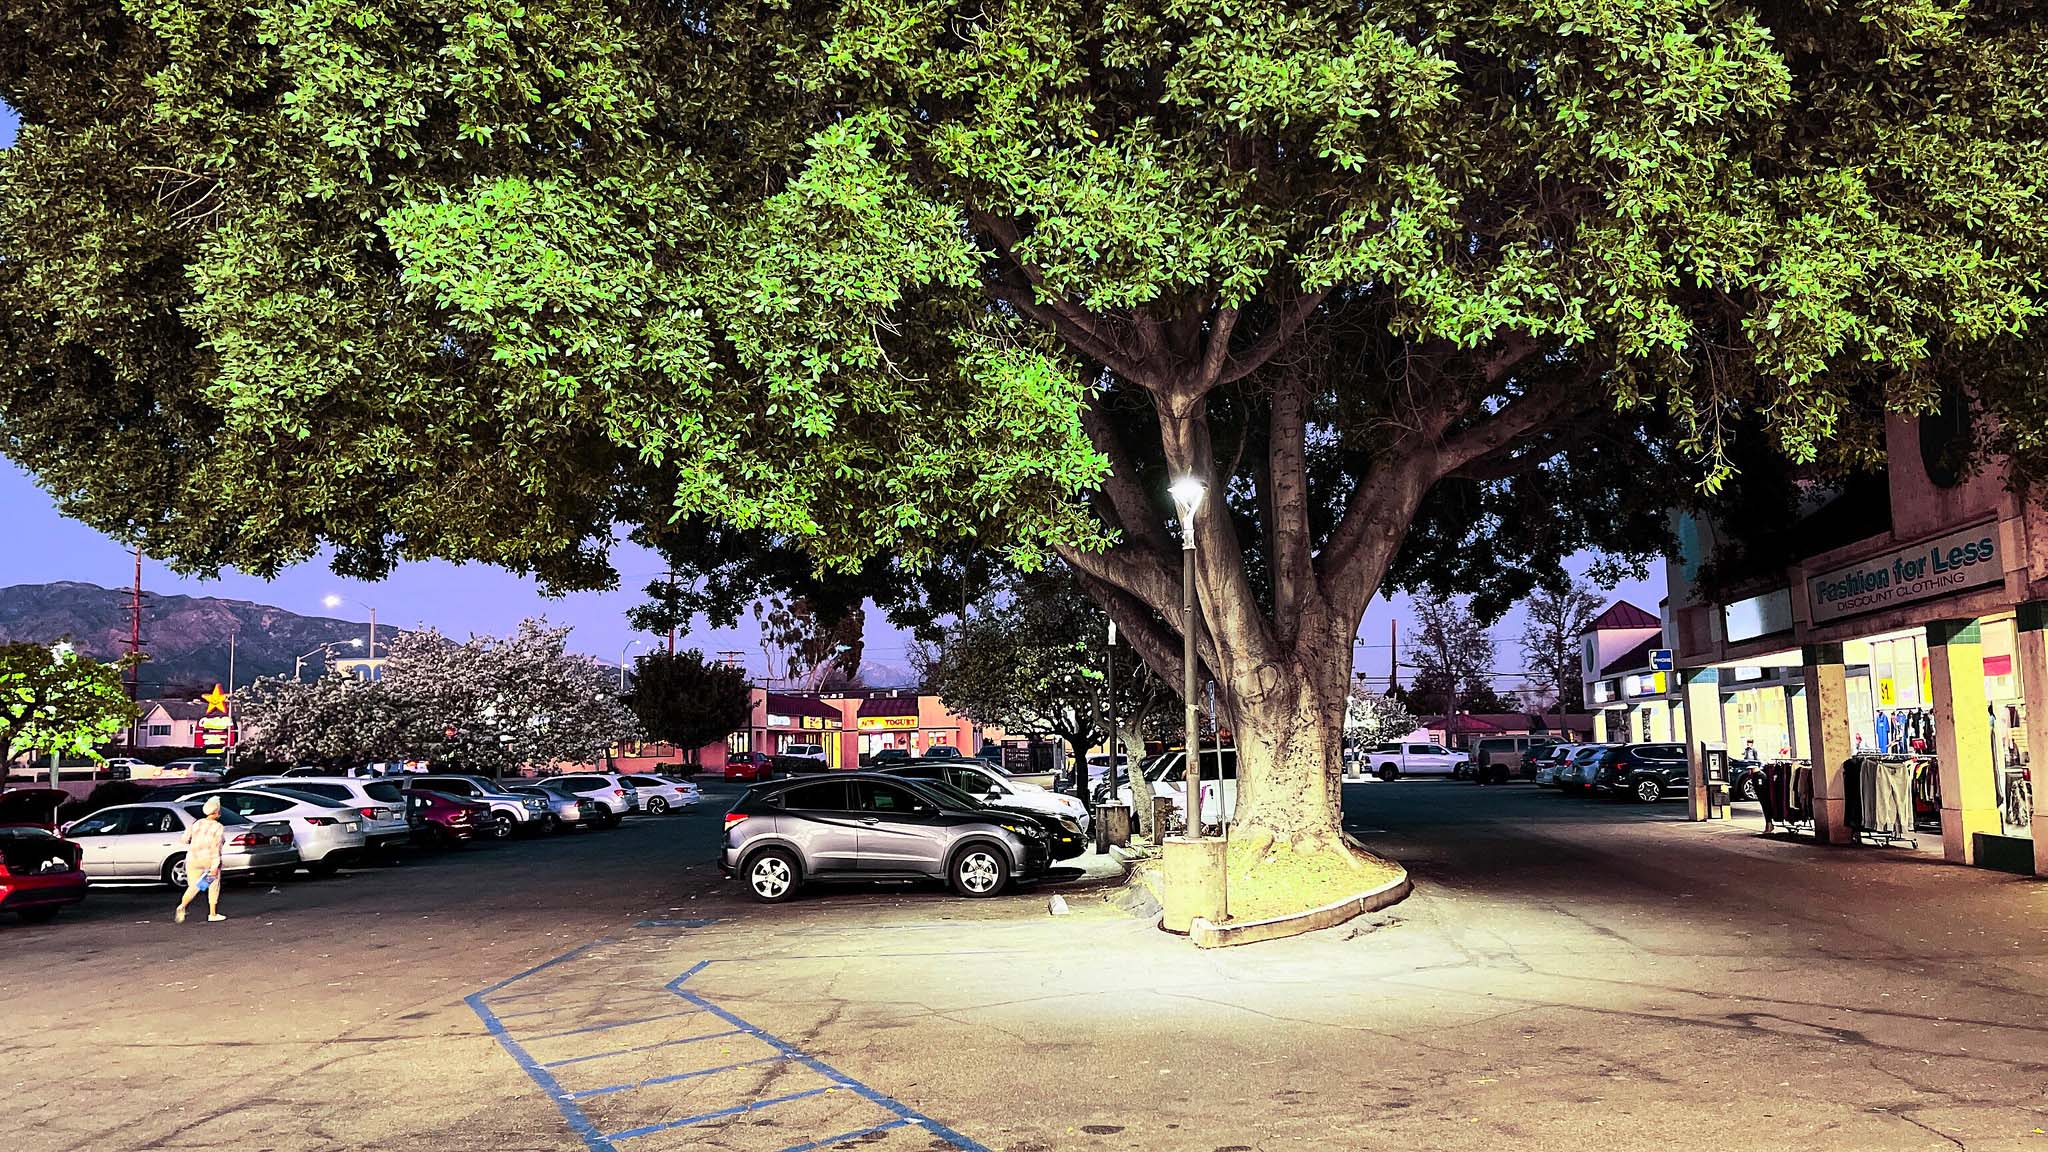 A large tree amidst a parking lot, cars and shops